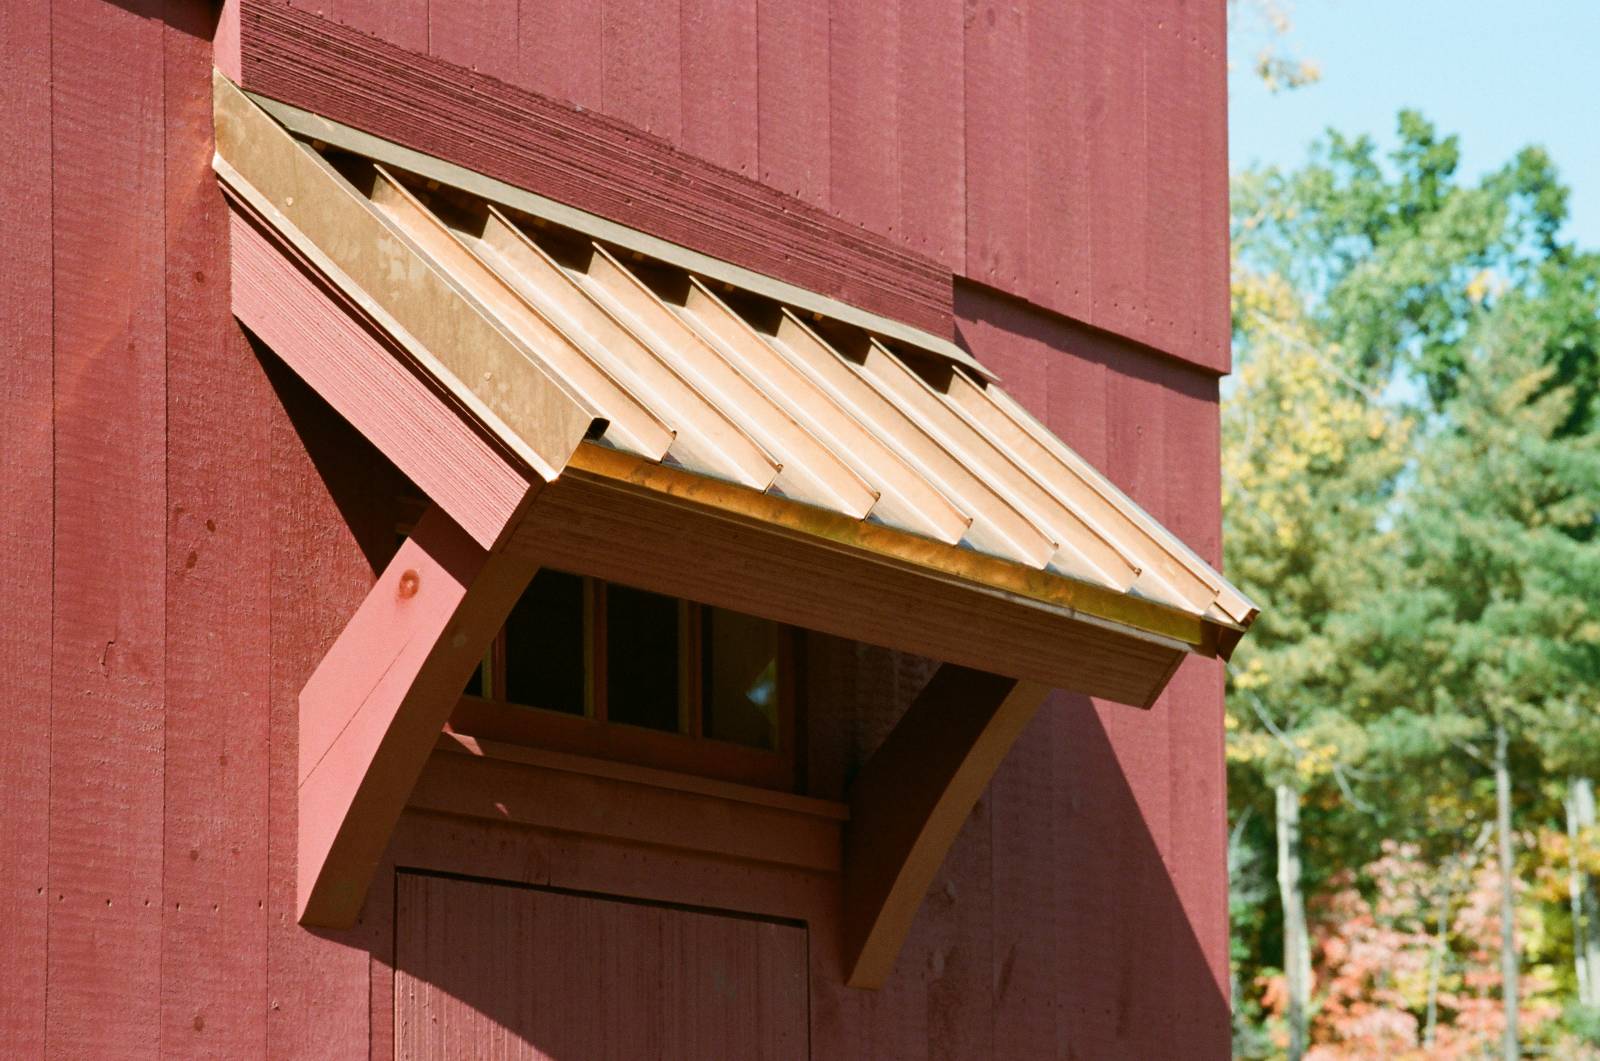 Custom Timber Frame Eyebrow Roof with Timbers Painted Red and Copper Standing Seam (on Carriage Barn)